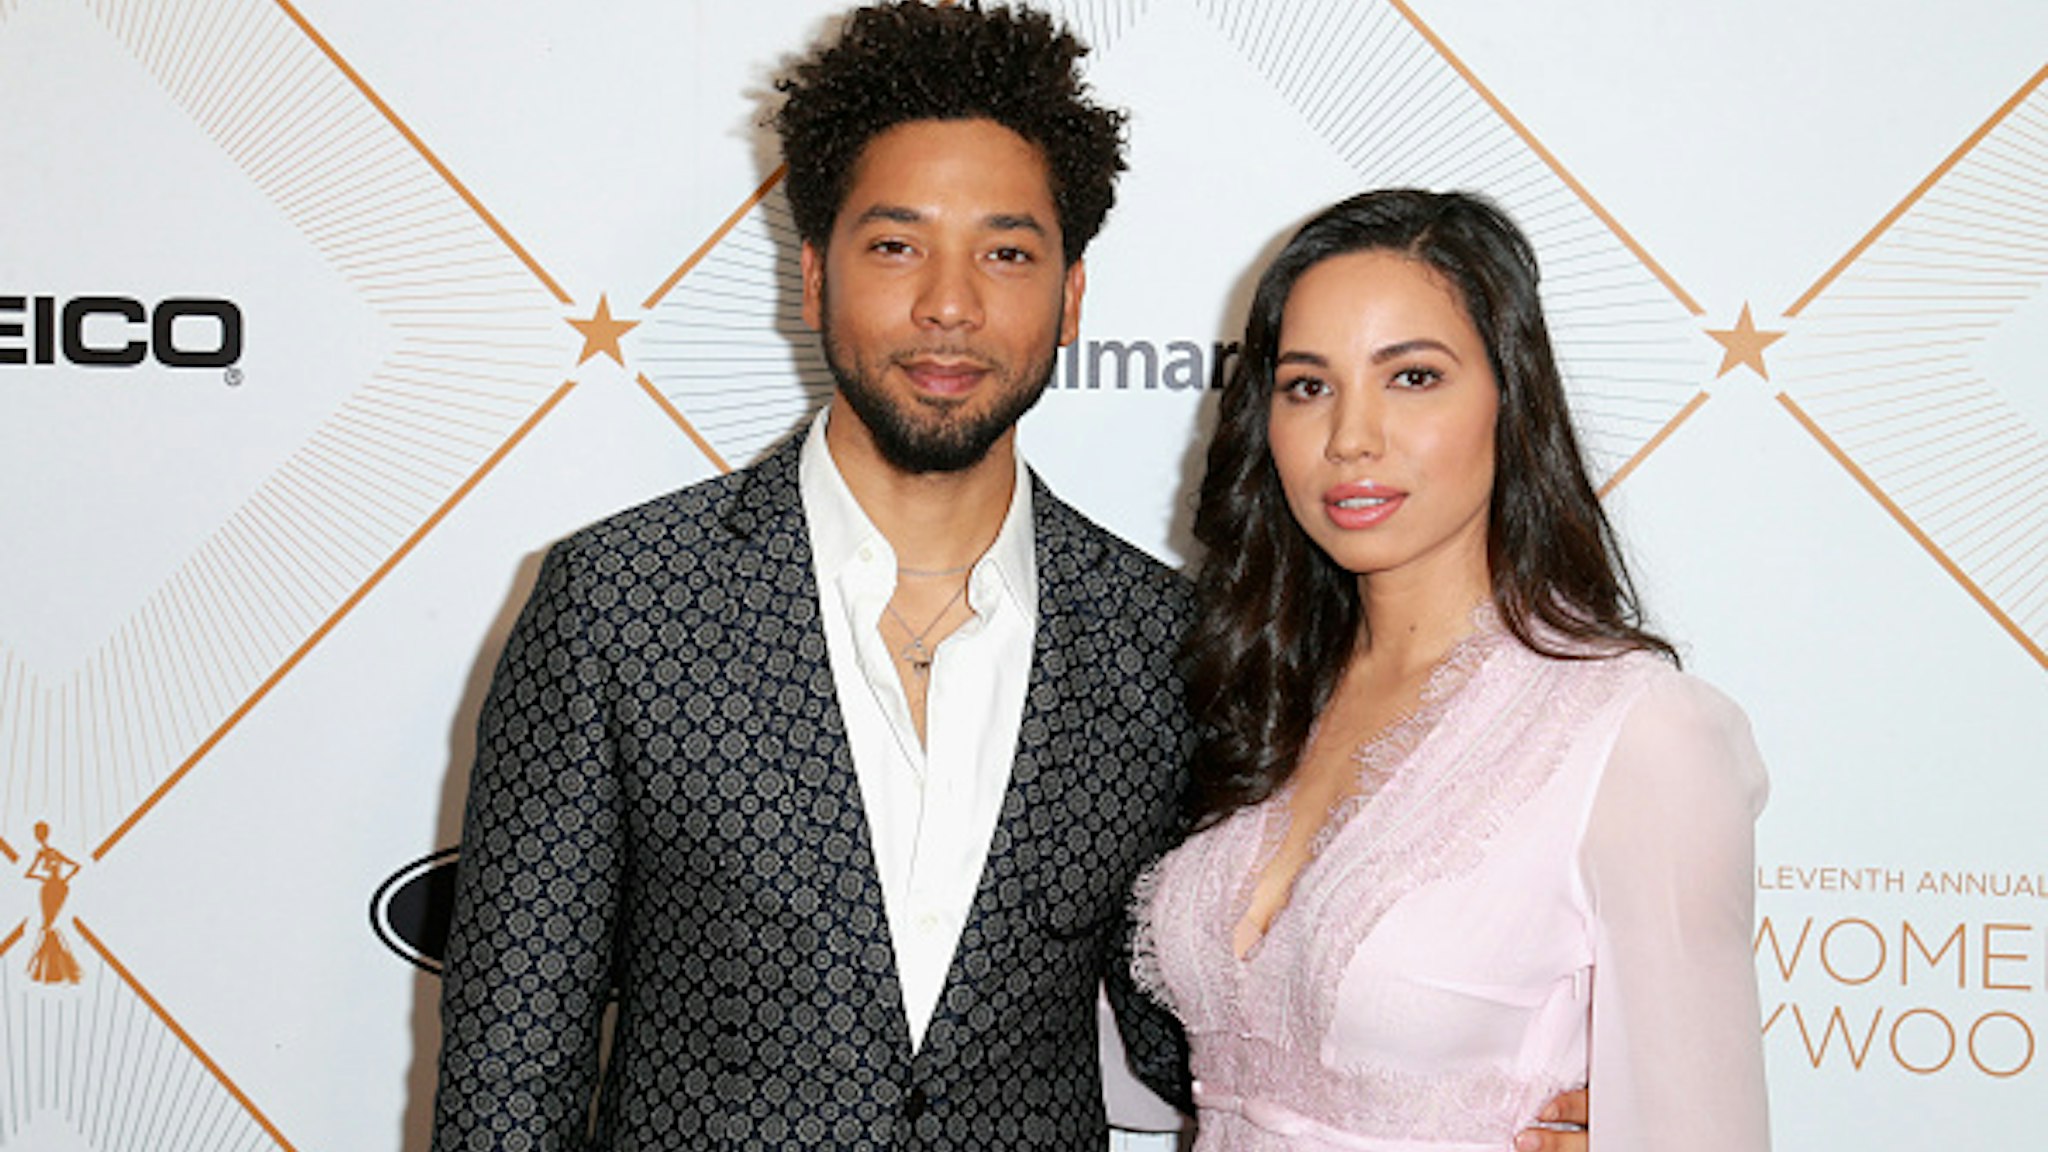 BEVERLY HILLS, CA - MARCH 01: Jussie Smollett (L) and Jurnee Smollett-Bell attend the 2018 Essence Black Women In Hollywood Oscars Luncheon at Regent Beverly Wilshire Hotel on March 1, 2018 in Beverly Hills, California.